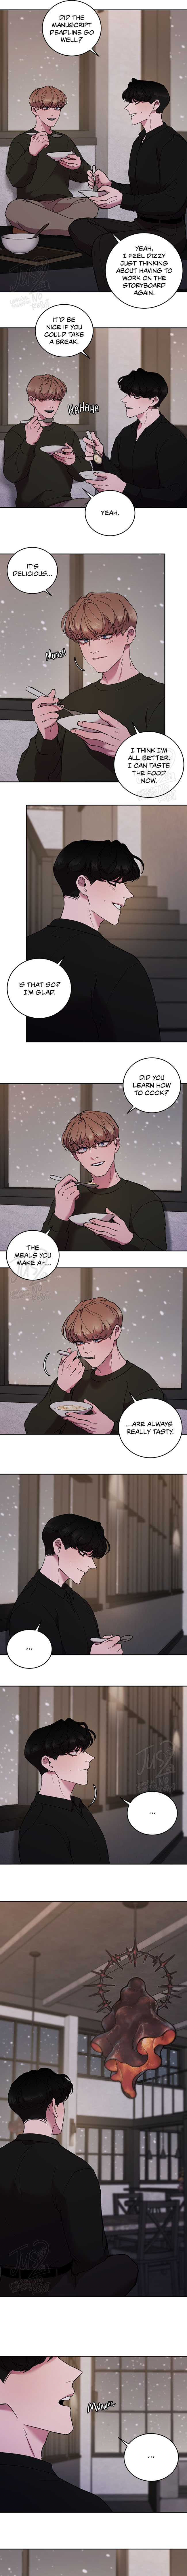 Hwanyoung's Misery - Page 2